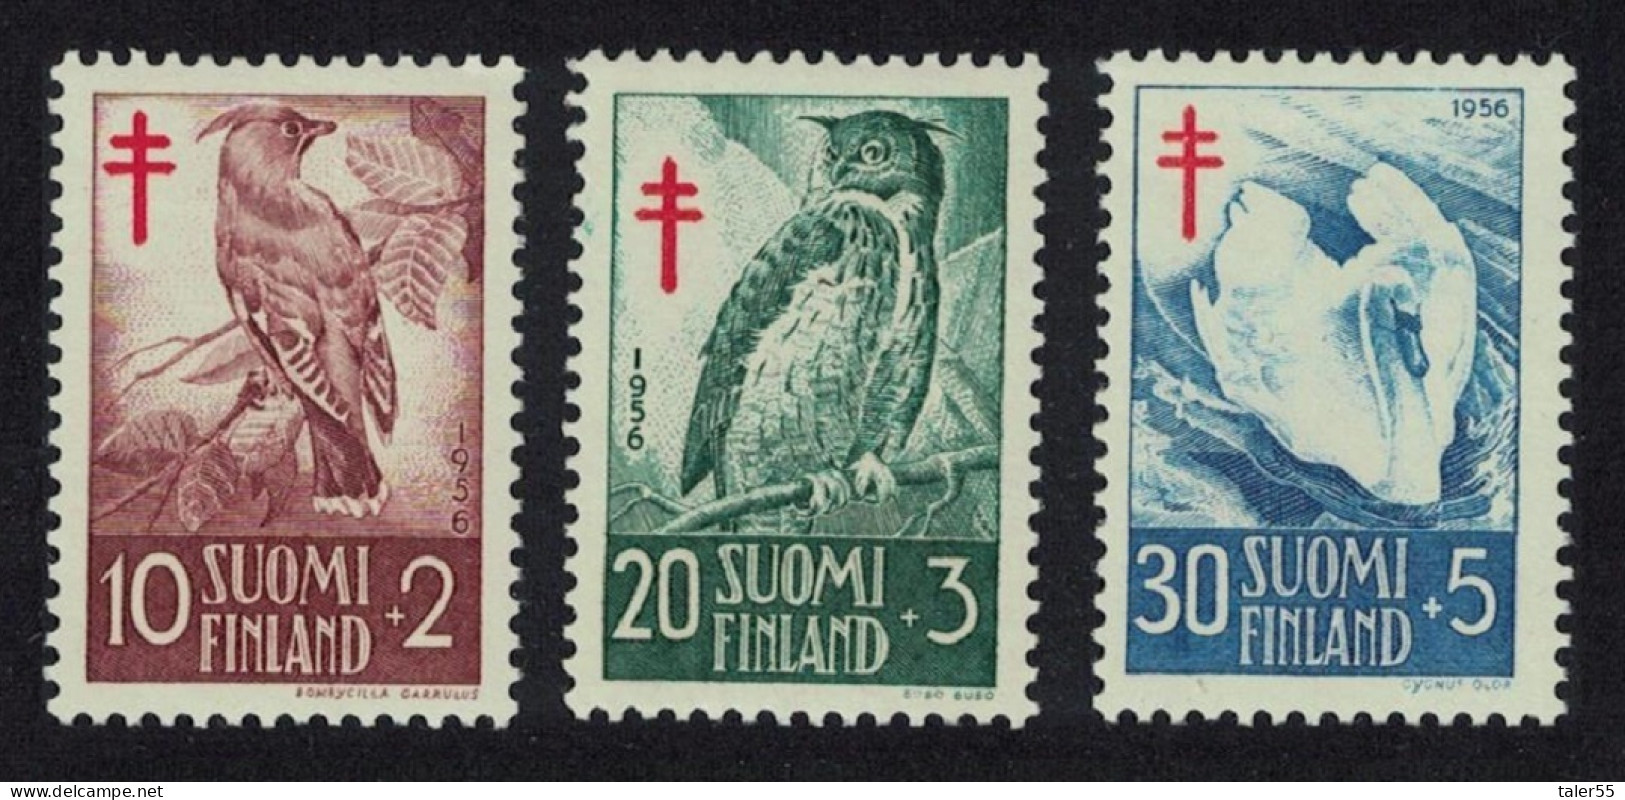 Finland Waxwing Owl Swan Birds 3v 1956 MNH SG#561-563 - Unused Stamps